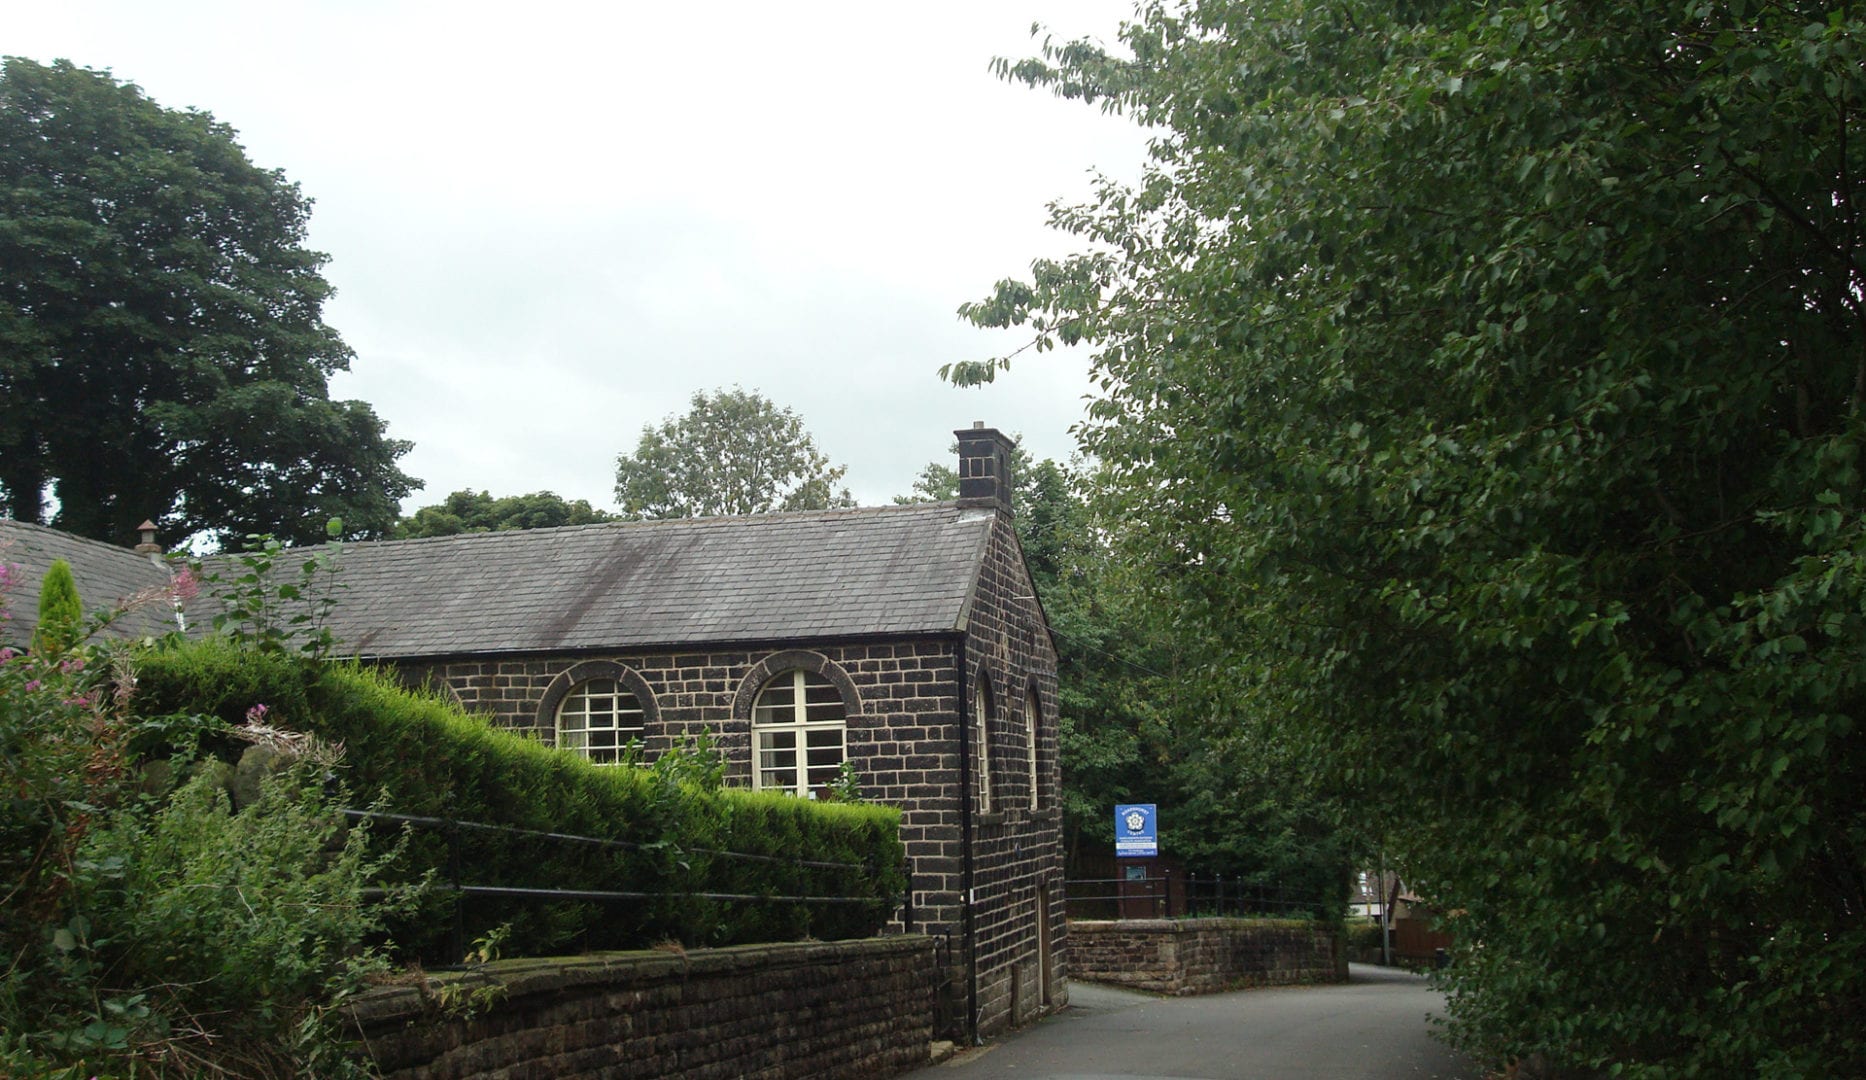 Boarshurst Centre Saddleworth group hostel for out door activities close to Manchester and the Peak District